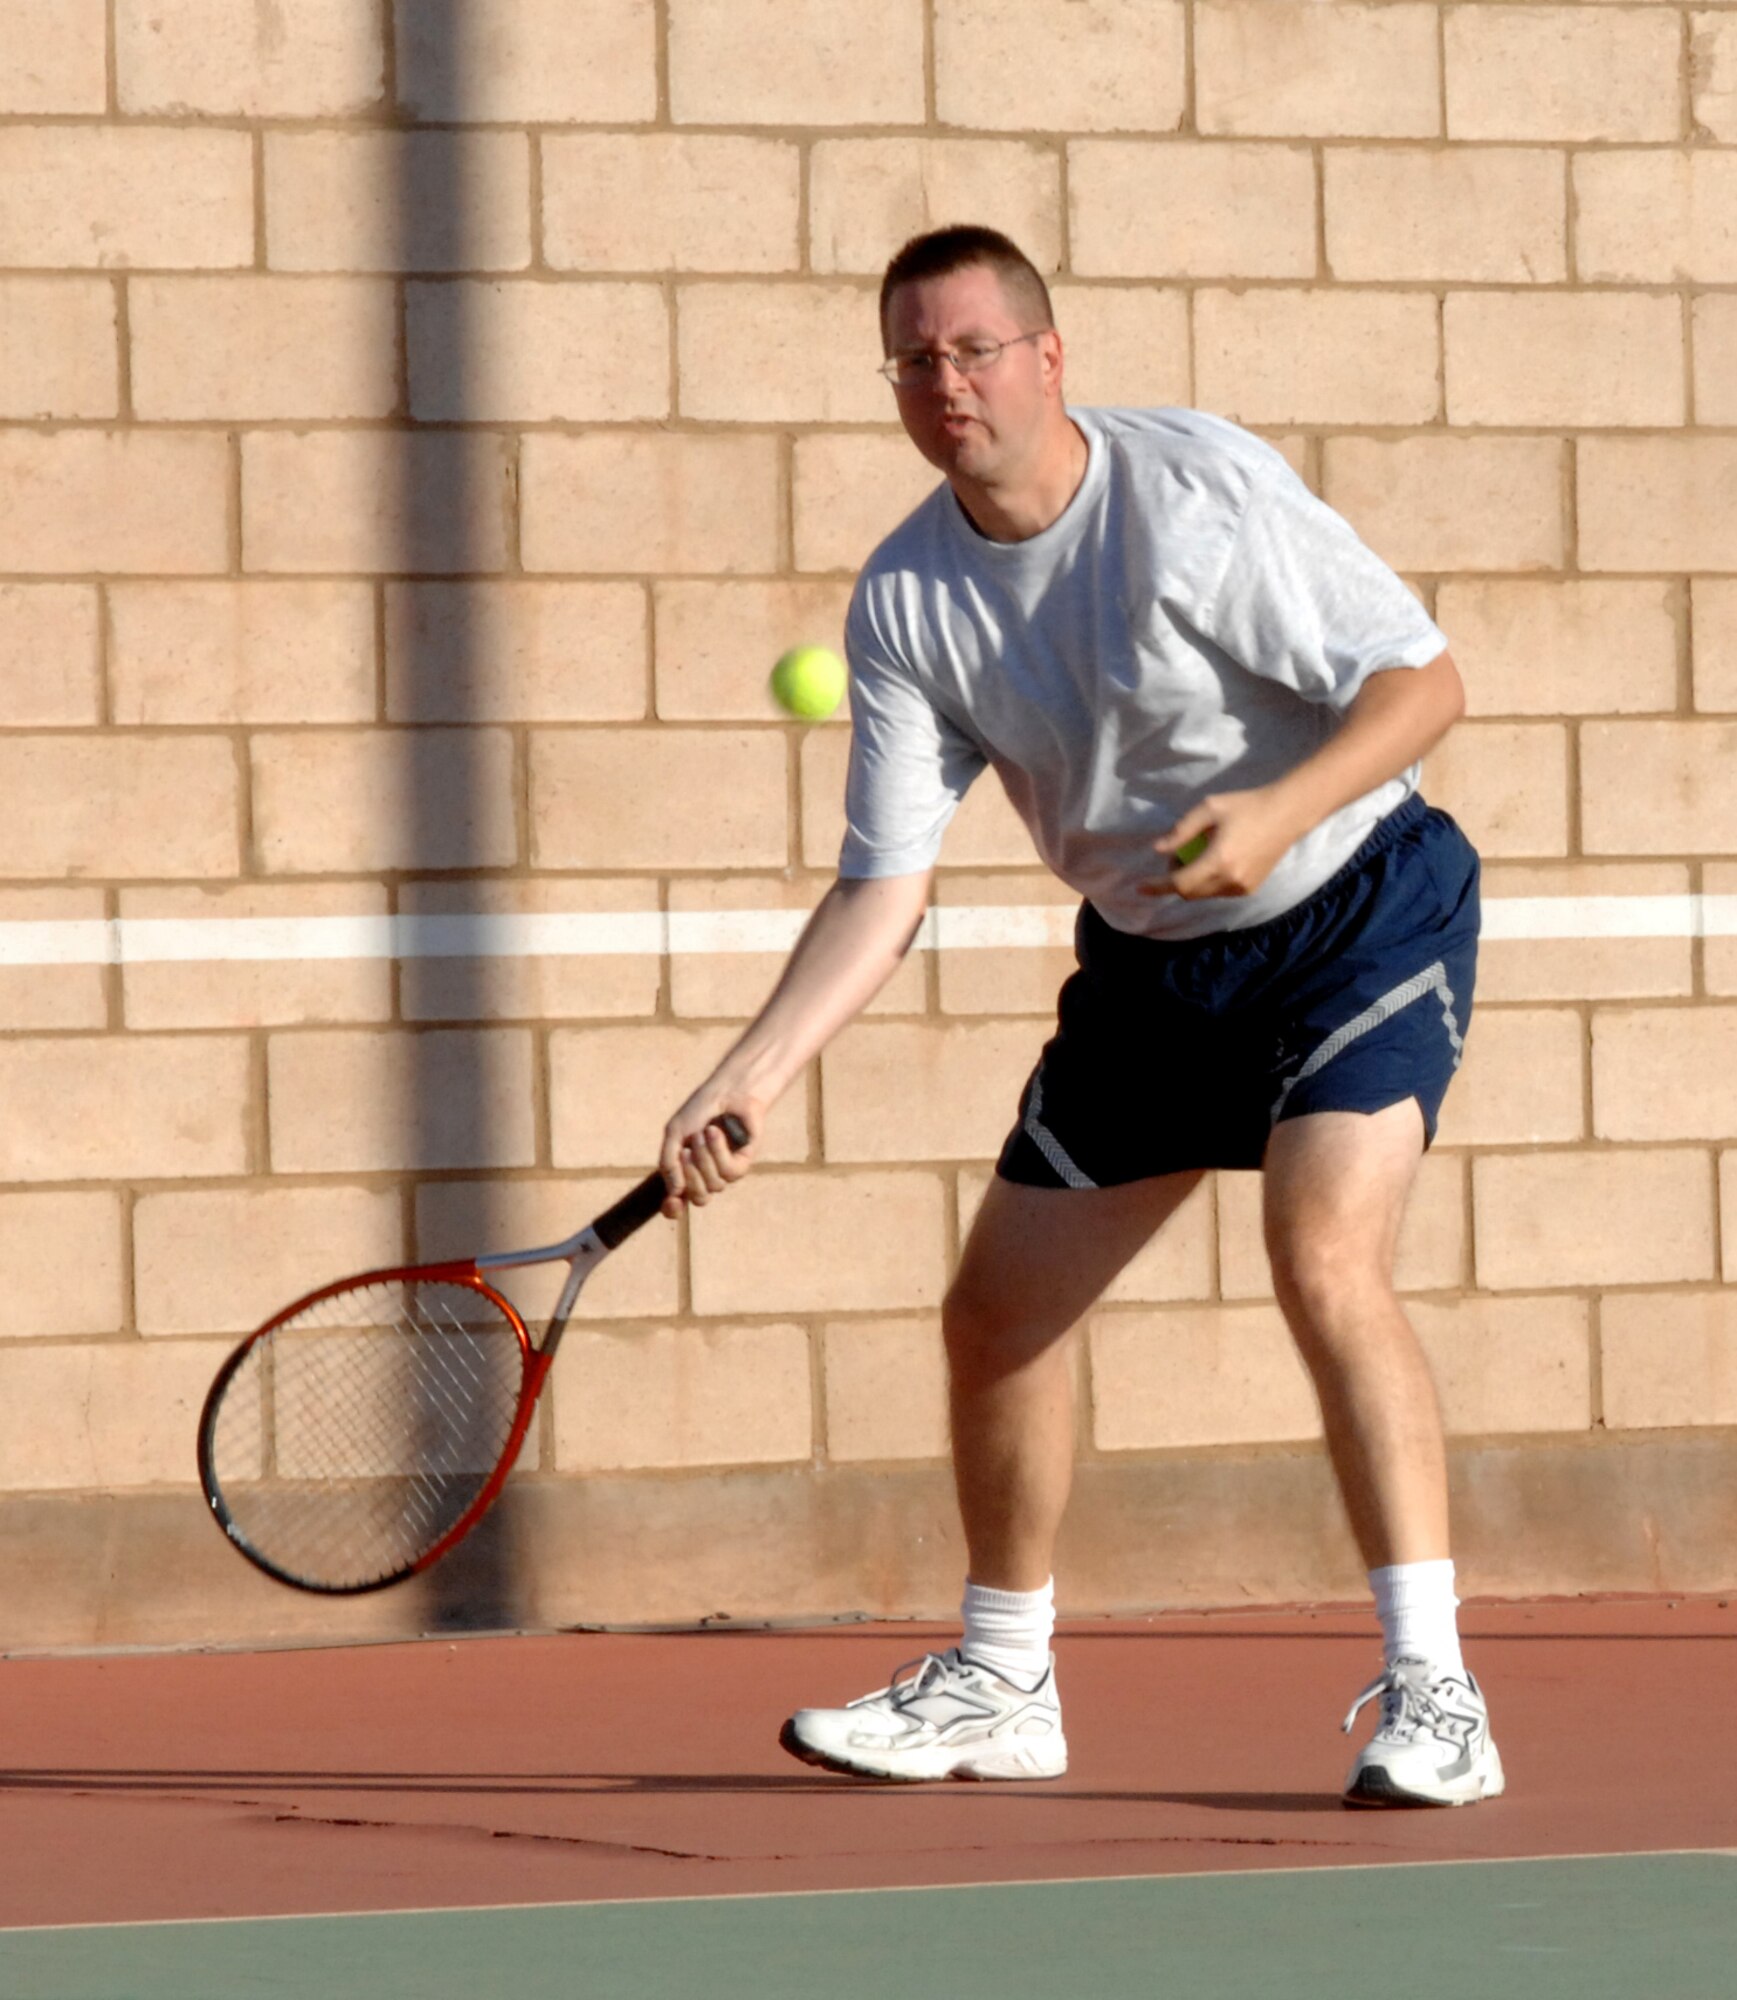 Tech. Sgt. Buckman, 49th Materiel Maintenance Support Squadron, aims to hit the tennis ball during his first match in the tennis competition on Sports Day at Holloman Air Force Base, N.M., October 10. Sergeant Buckman won the overall competition for large squadrons. (U.S. Air Force photo/Airman Sondra M. Escutia)